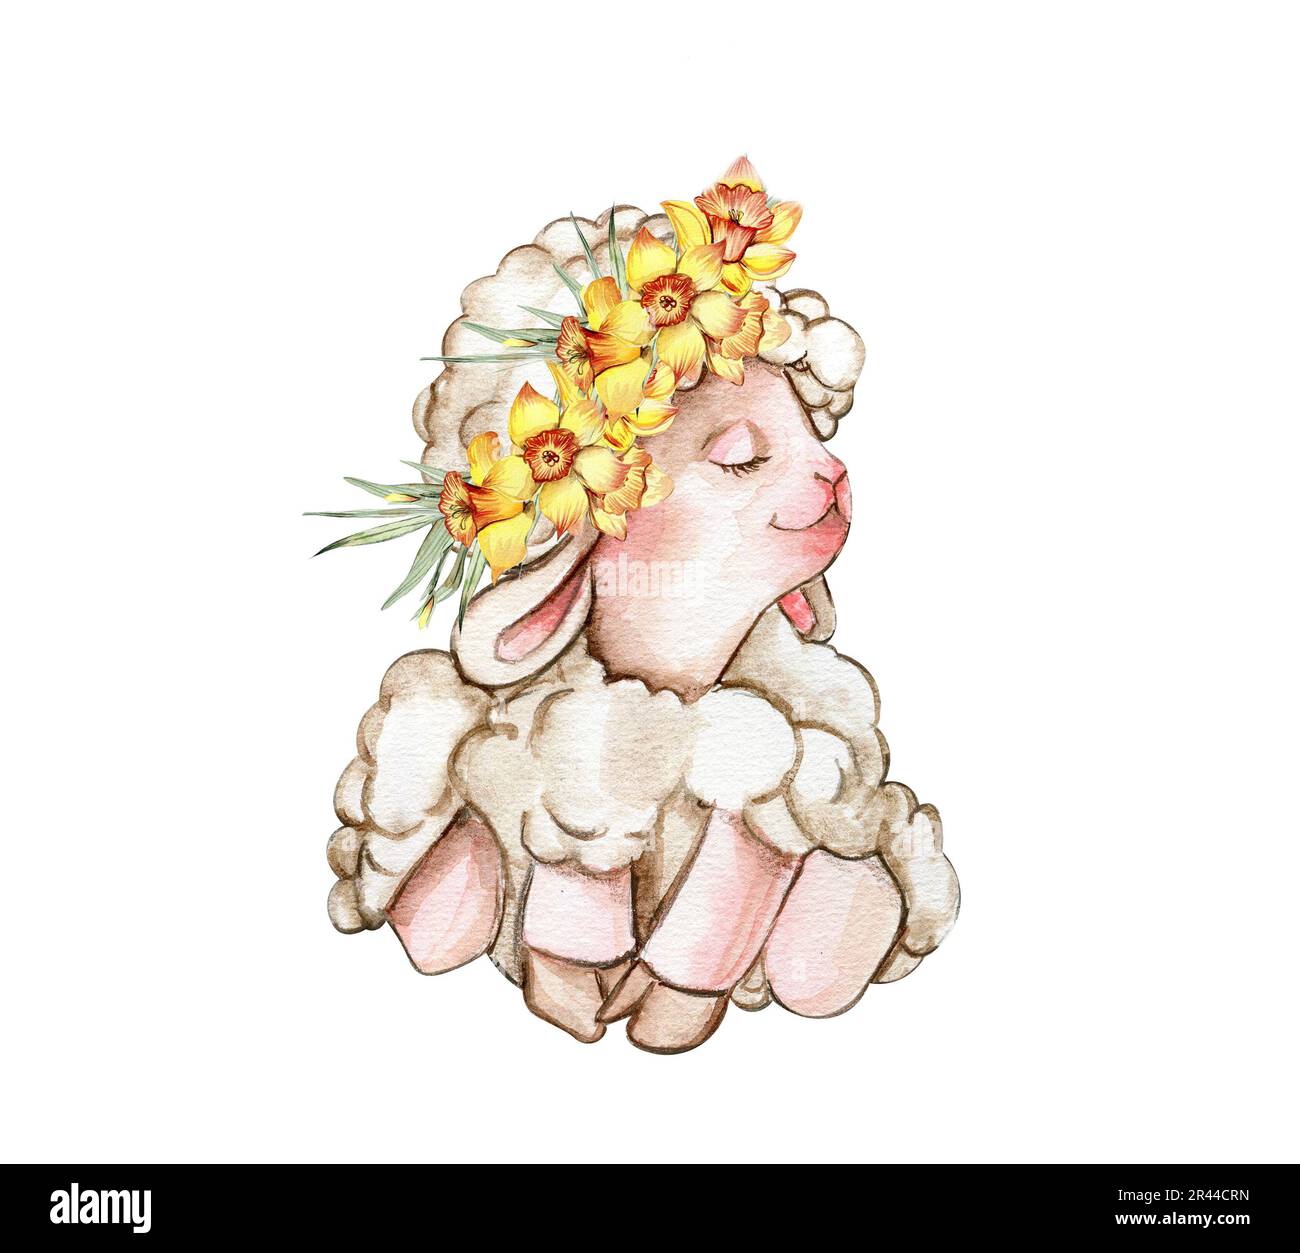 Watercolor white fluffy sheep with wreath made from yellow narcissus flowers on its head. Illustration of farm baby animal. Perfect for wedding invita Stock Photo